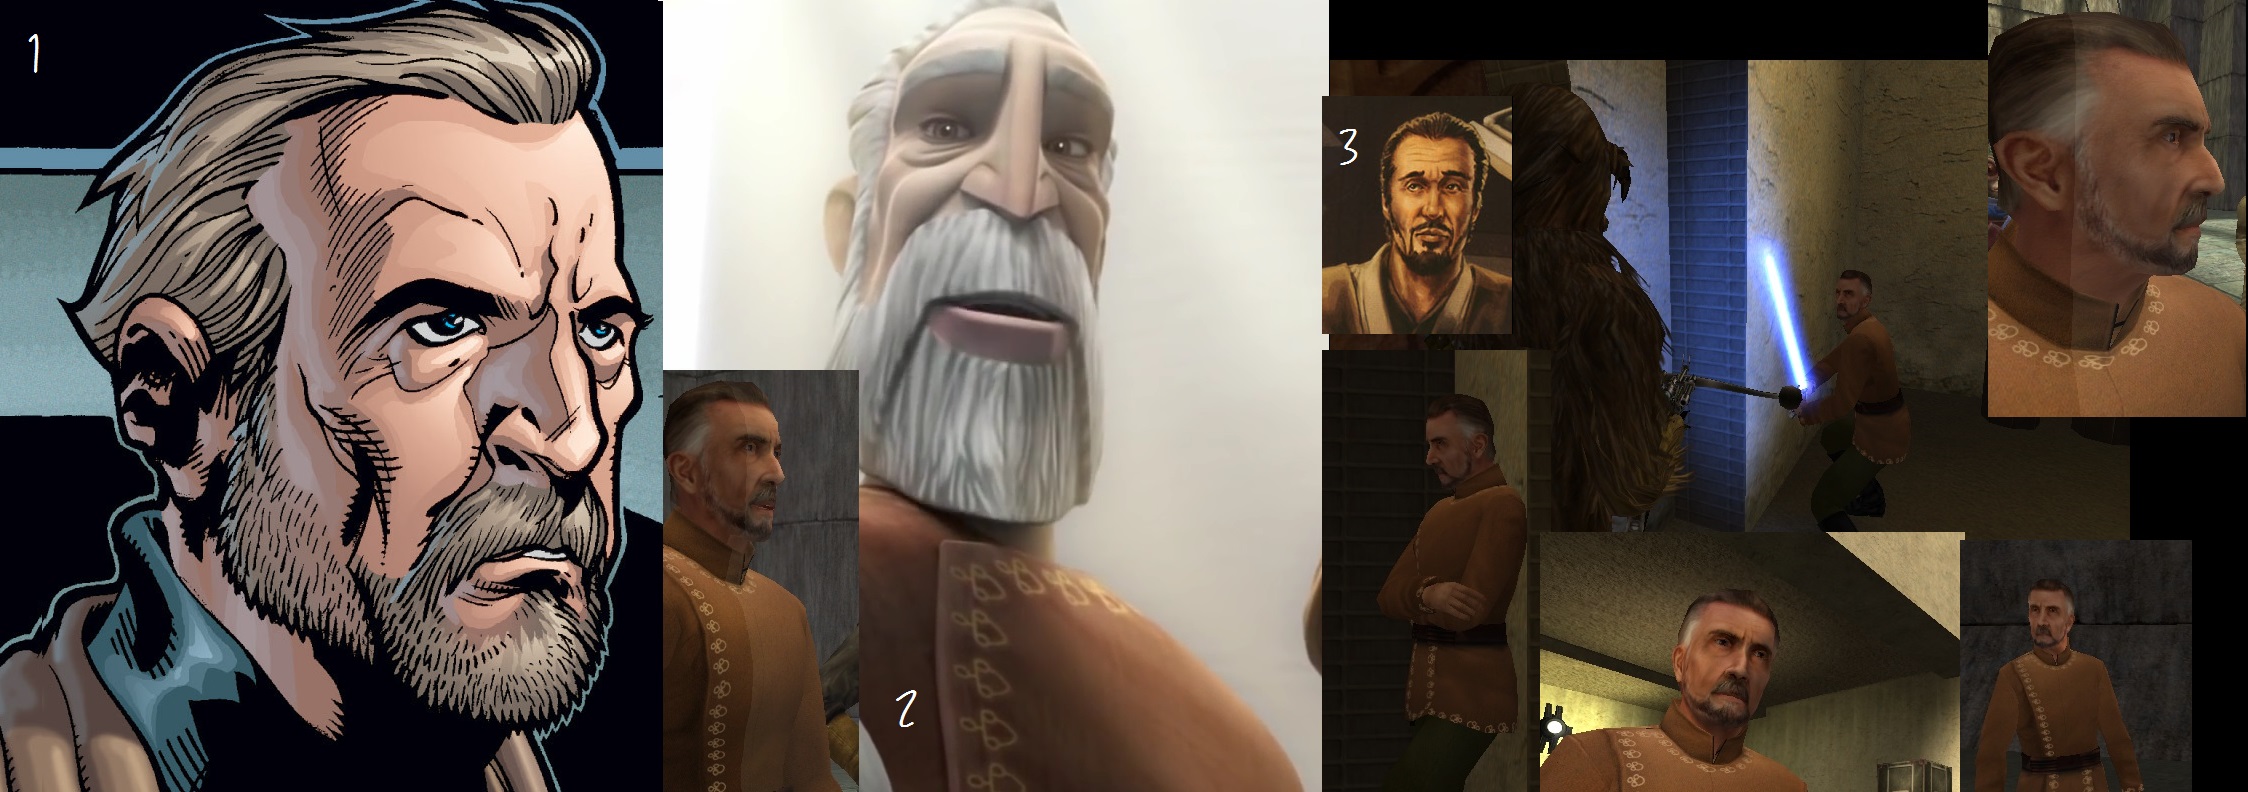 More information about "Master Dooku"